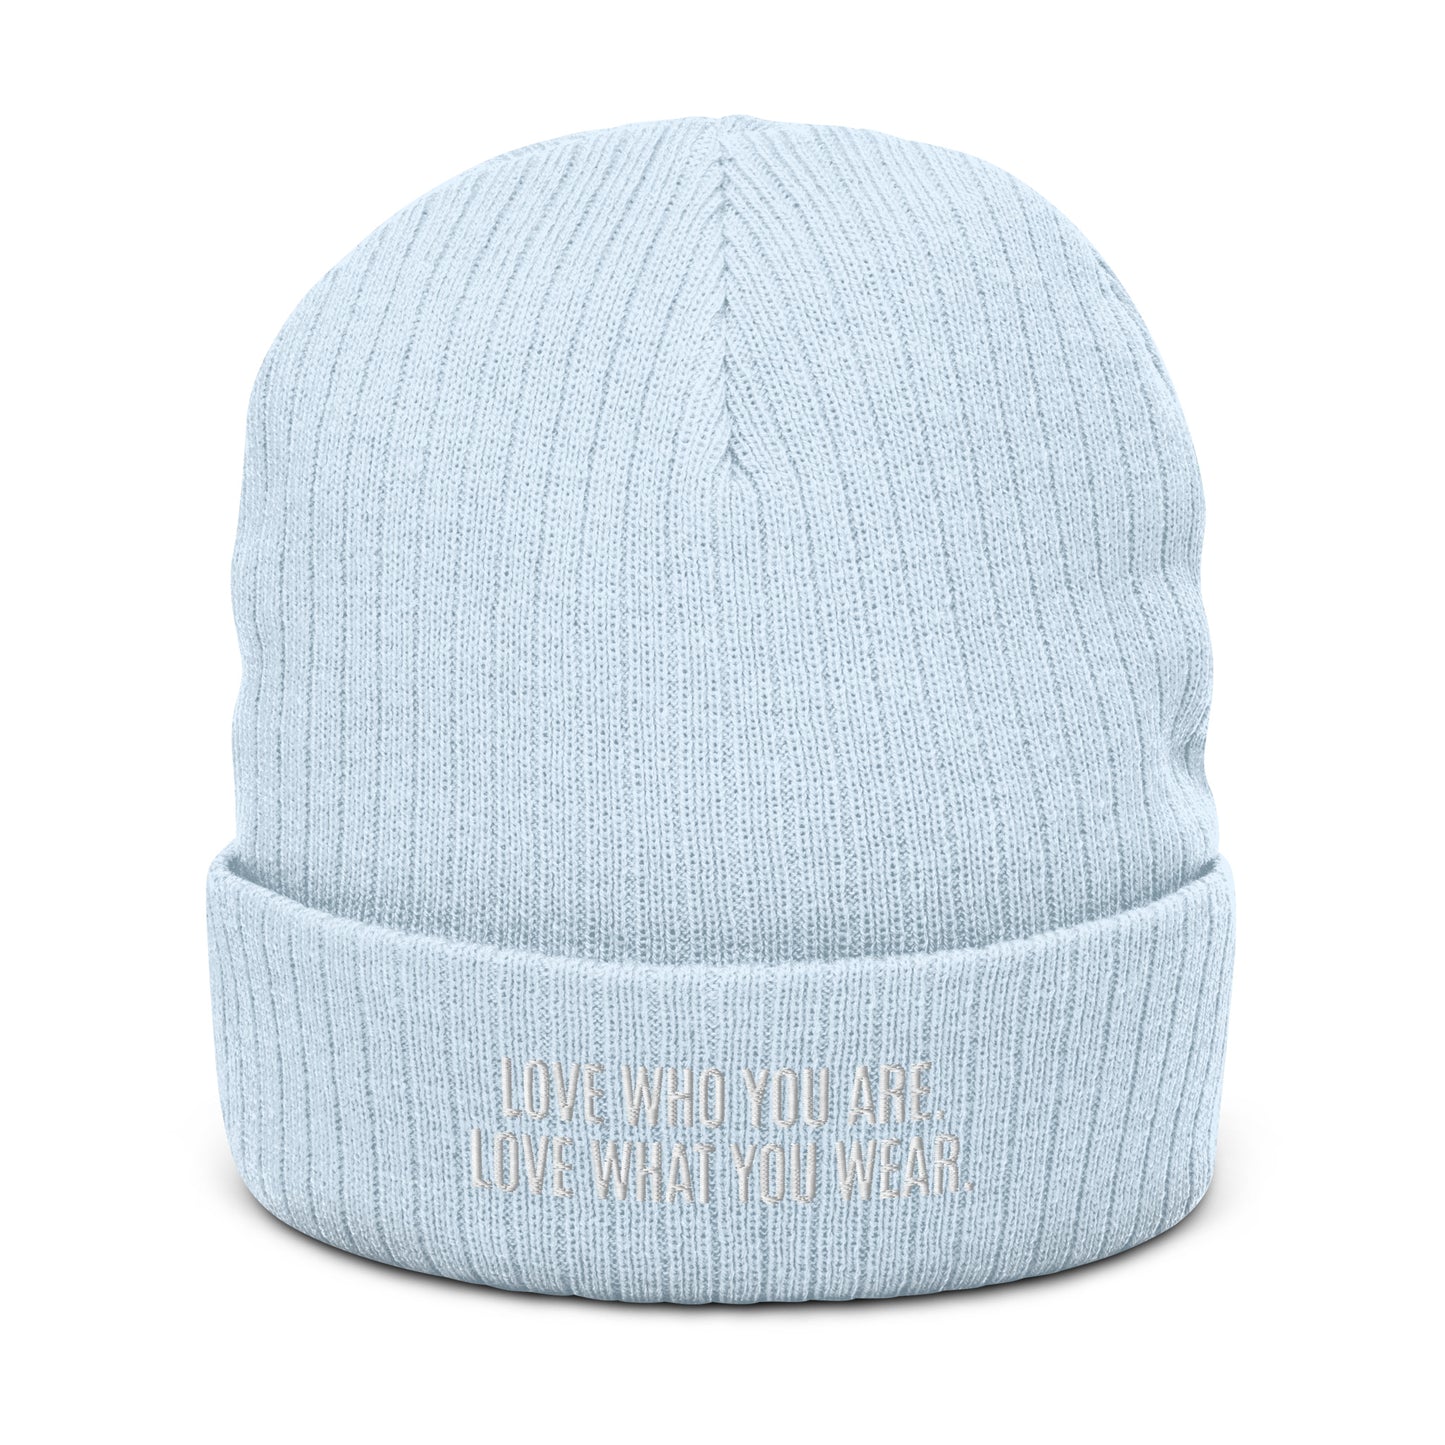 "Love Who You Are" Ribbed Knit Beanie (Embrace Body Love)